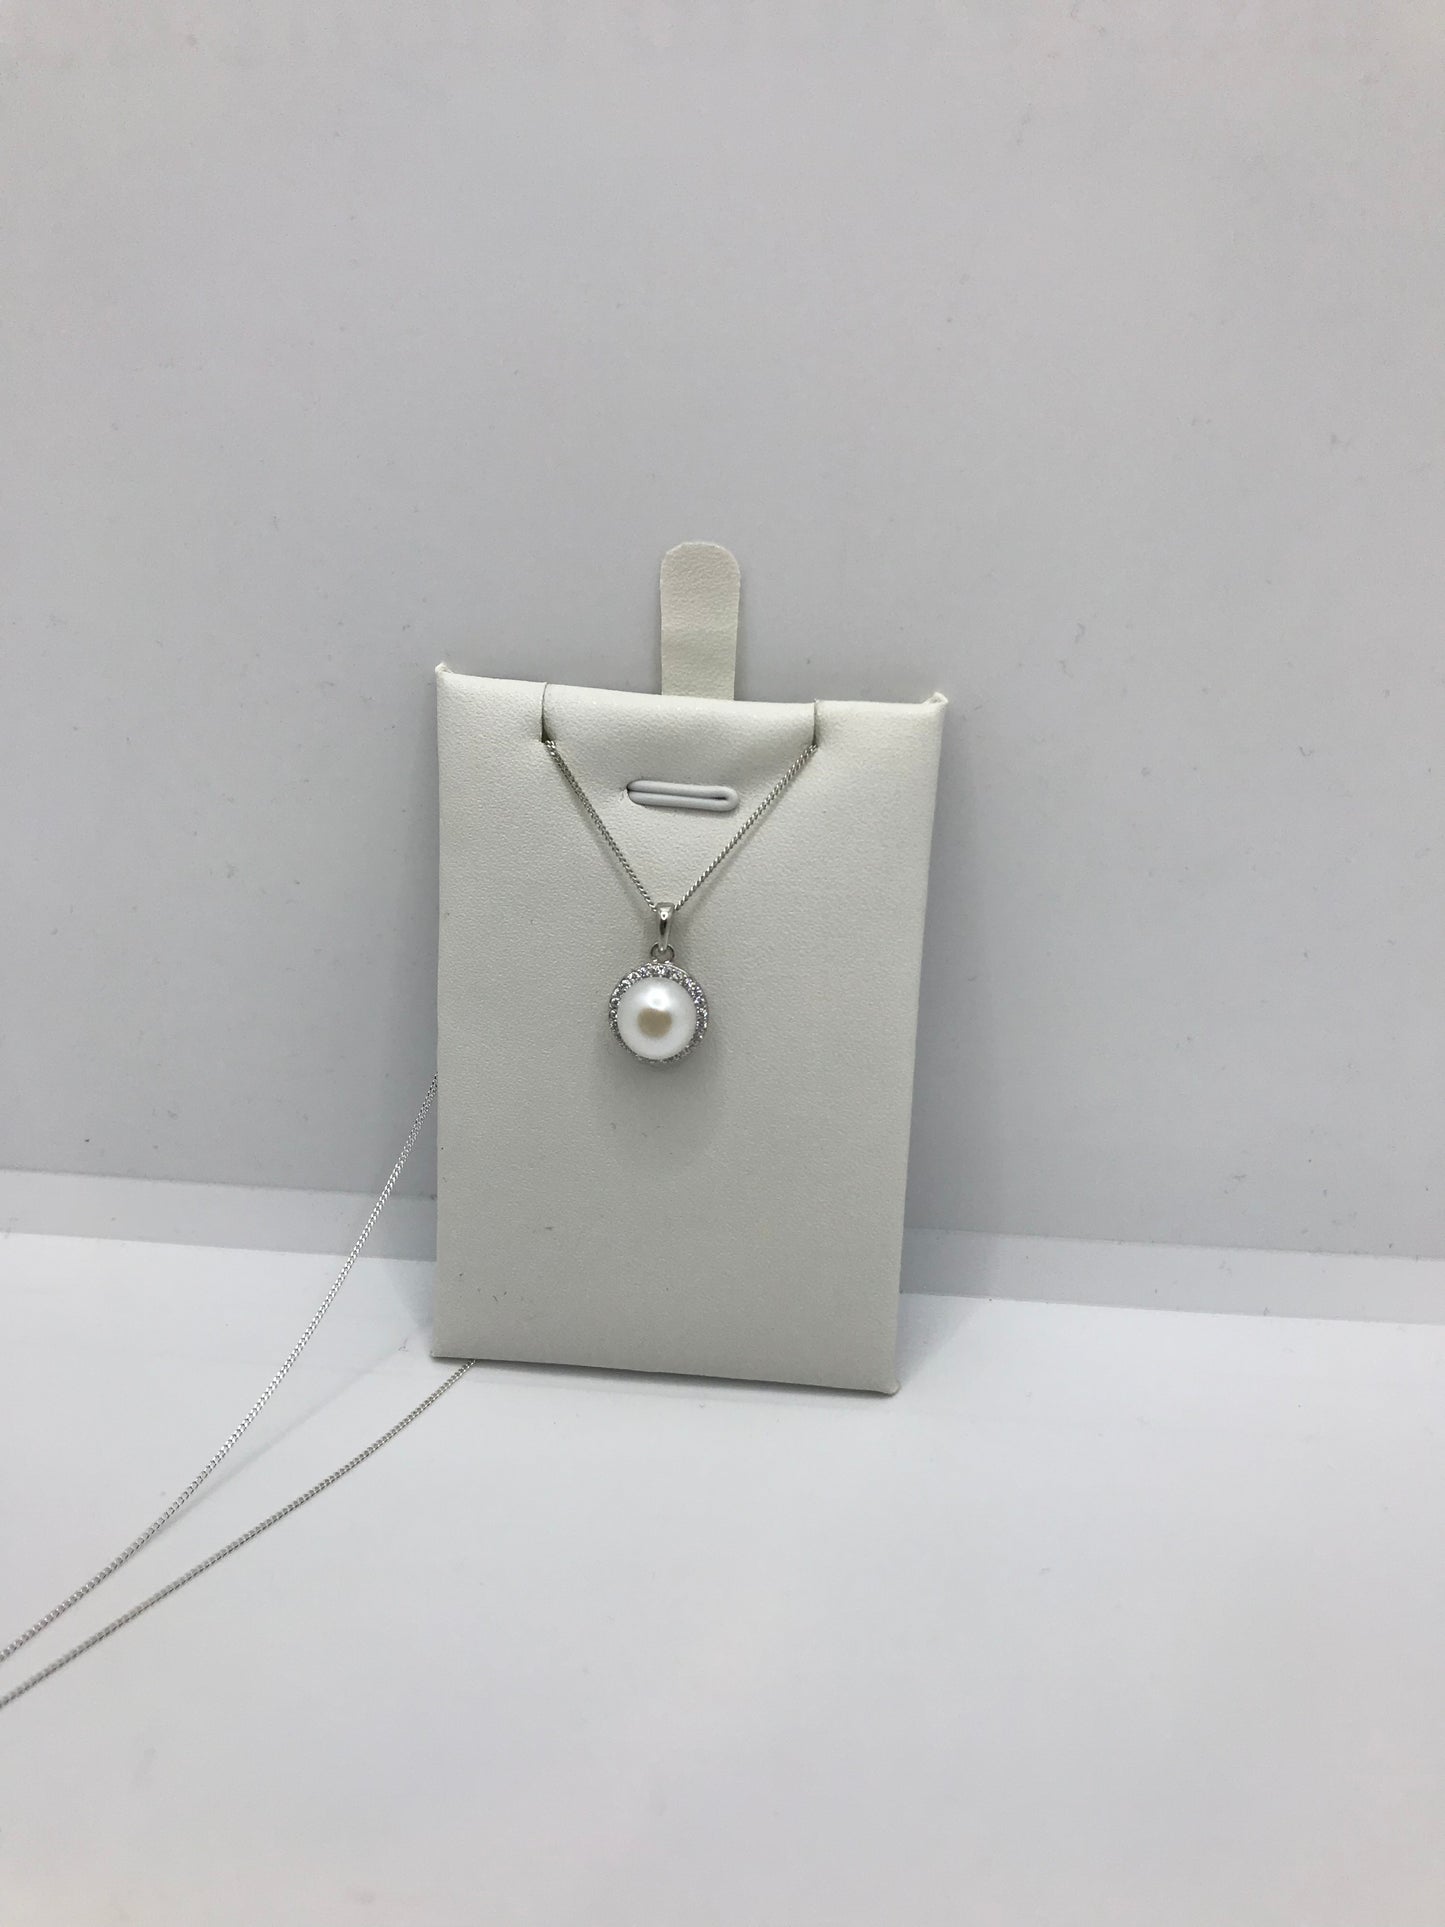 Real silver Pearl necklace